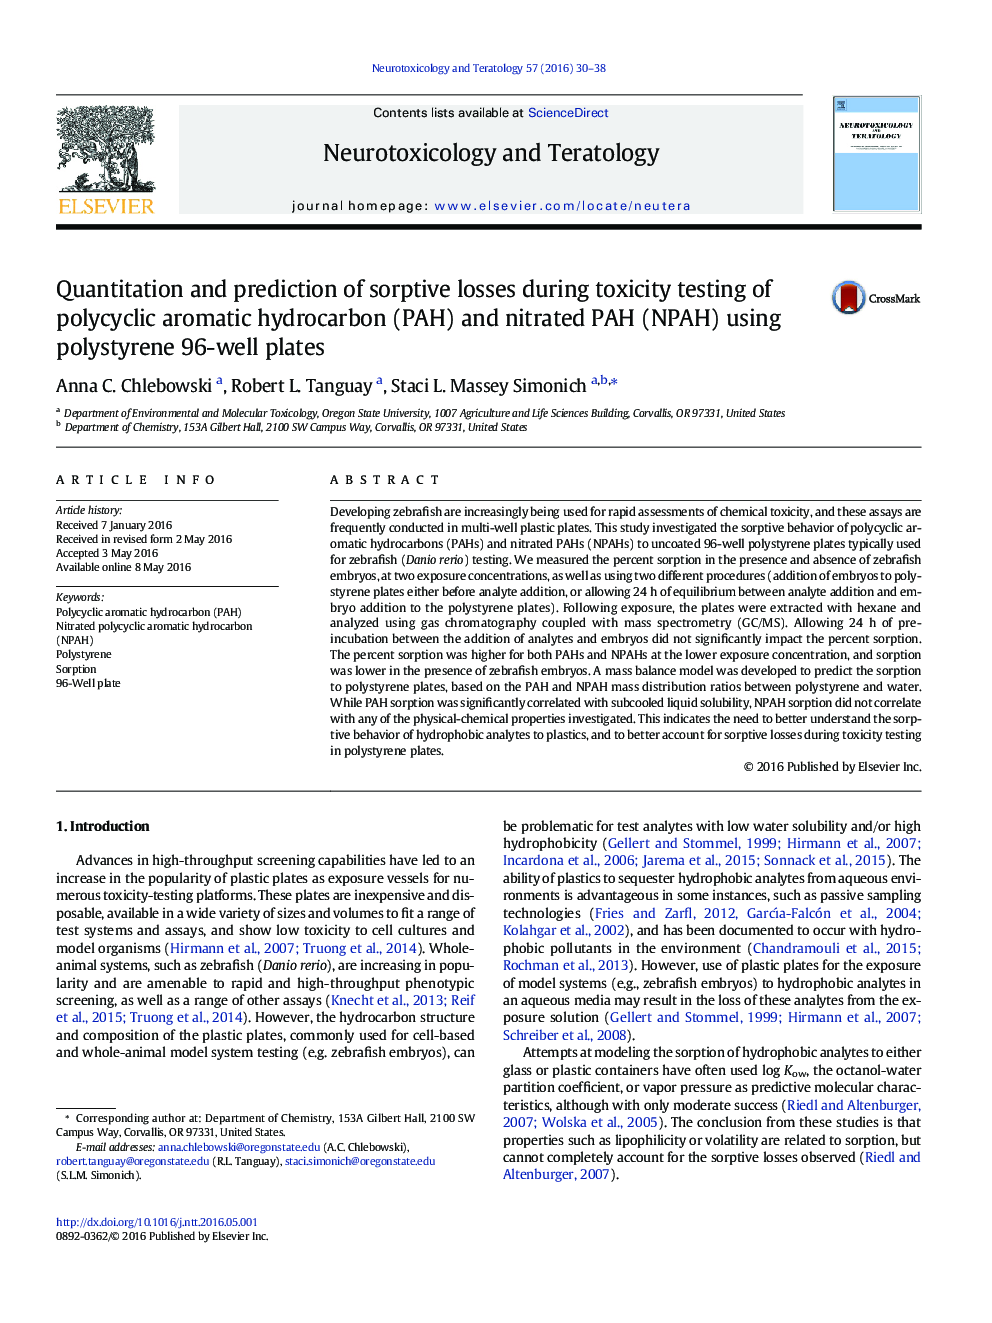 Quantitation and prediction of sorptive losses during toxicity testing of polycyclic aromatic hydrocarbon (PAH) and nitrated PAH (NPAH) using polystyrene 96-well plates